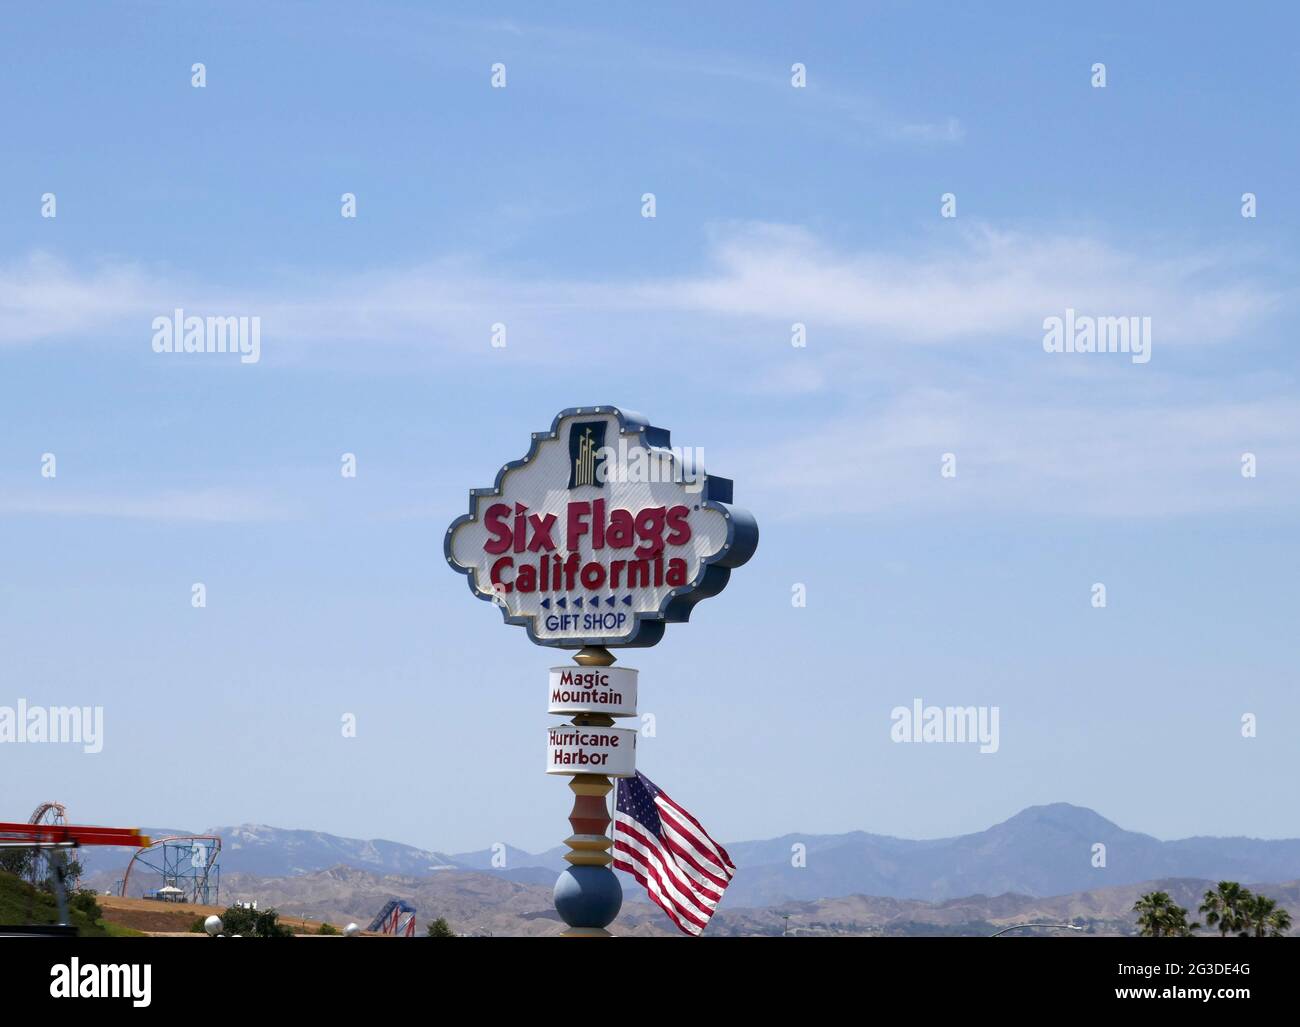 Los Angeles, California, USA 15th June 2021 A general view of atmosphere of Six Flags Magic Mountain on California Reopening Day June 15, 2021 in Los Angeles, California, USA. Photo by Barry King/Alamy Stock Photo Stock Photo